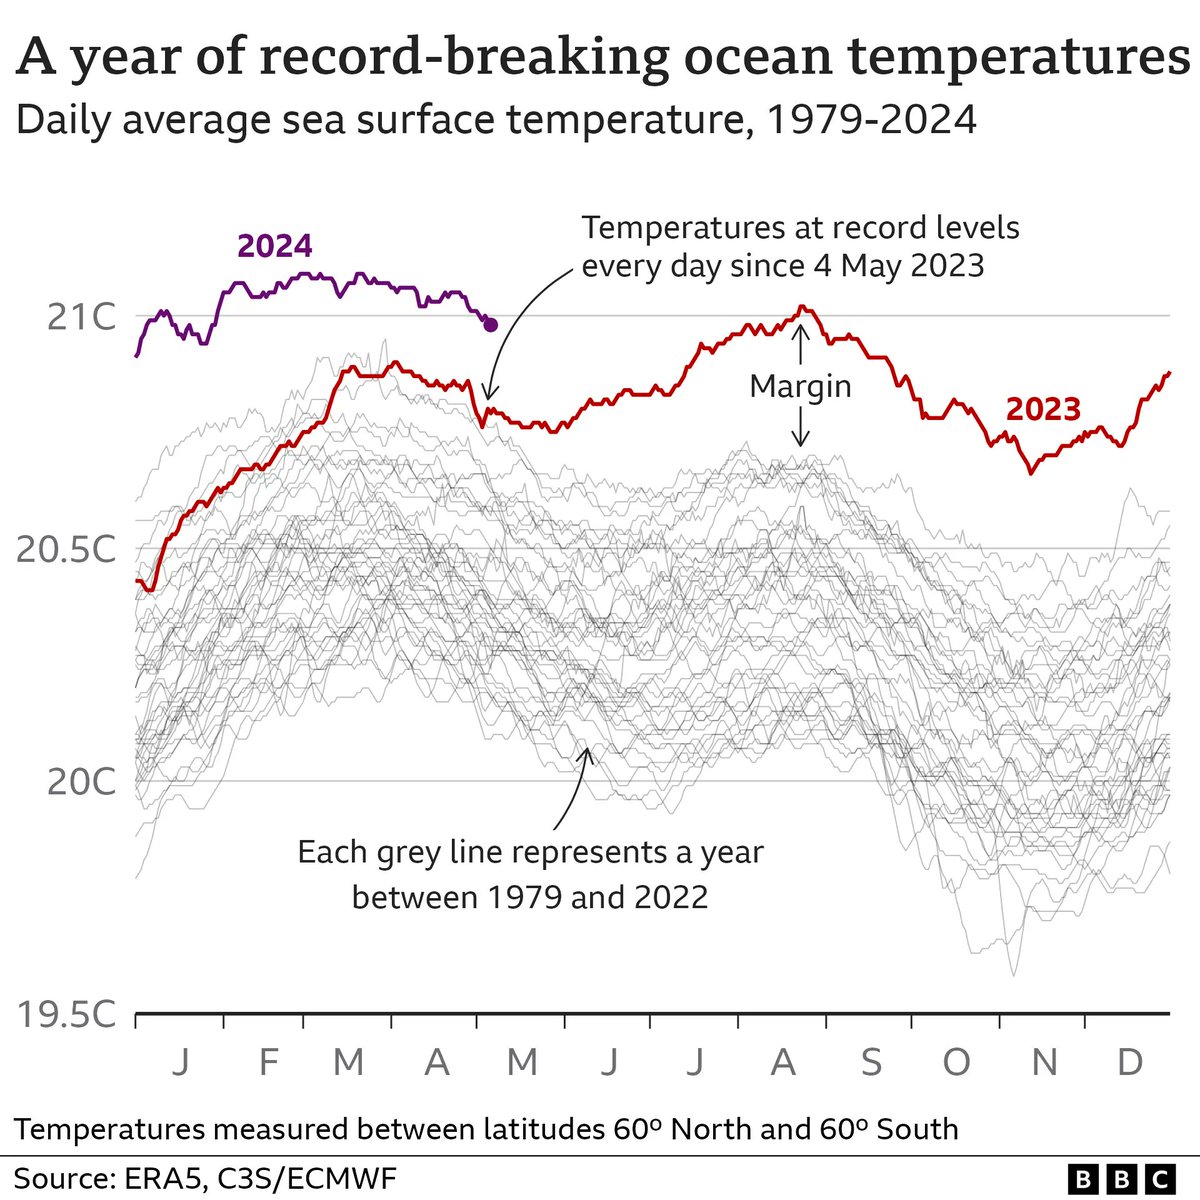 An entire year of daily record-smashing sea surface temperatures, and no sign whatsoever of the trend ending. Truly terrifying.